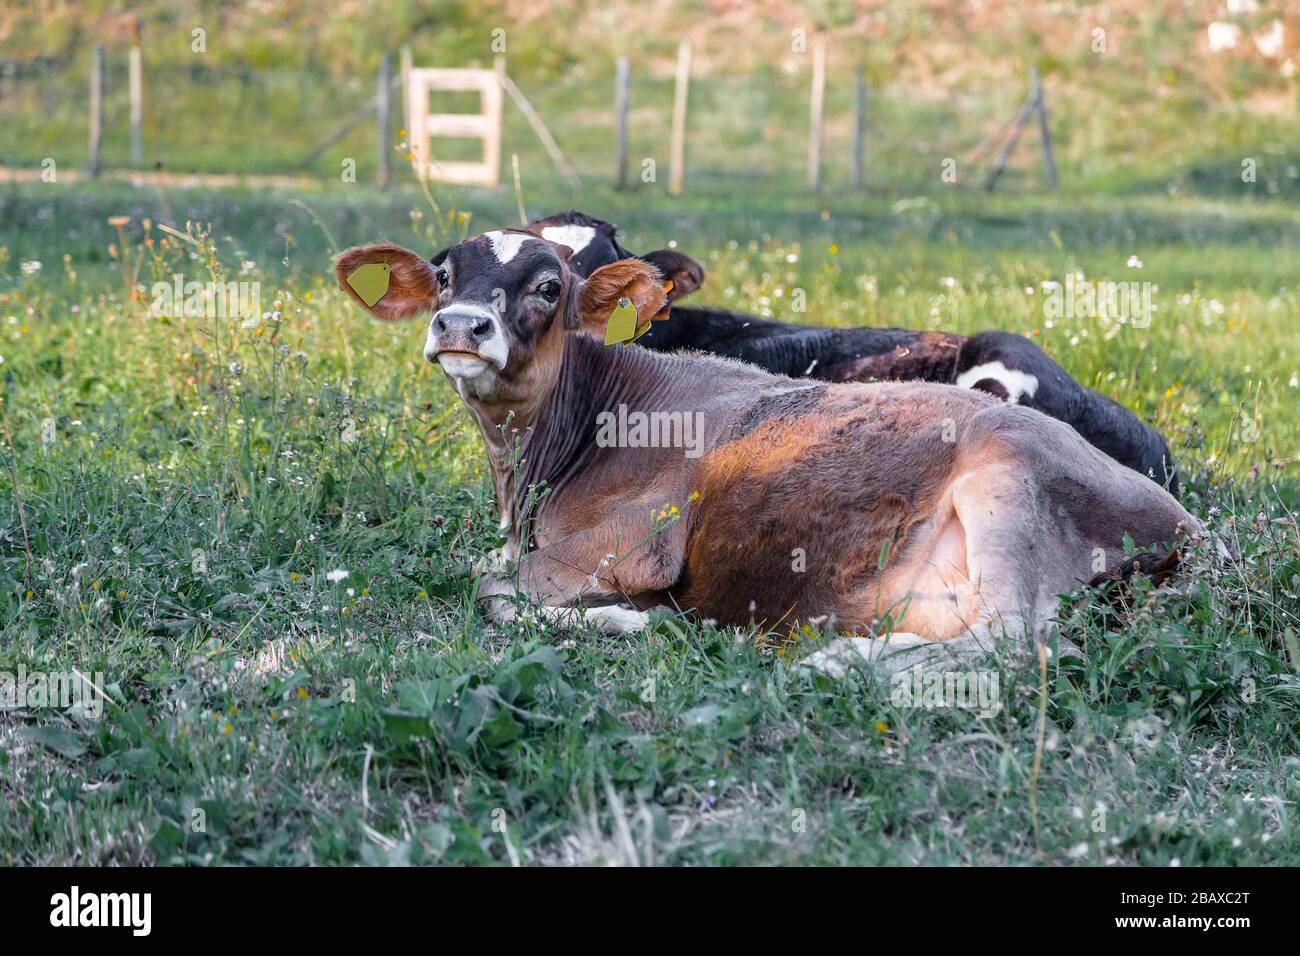 Young cows with tags in their ears lie in a meadow Stock Photo